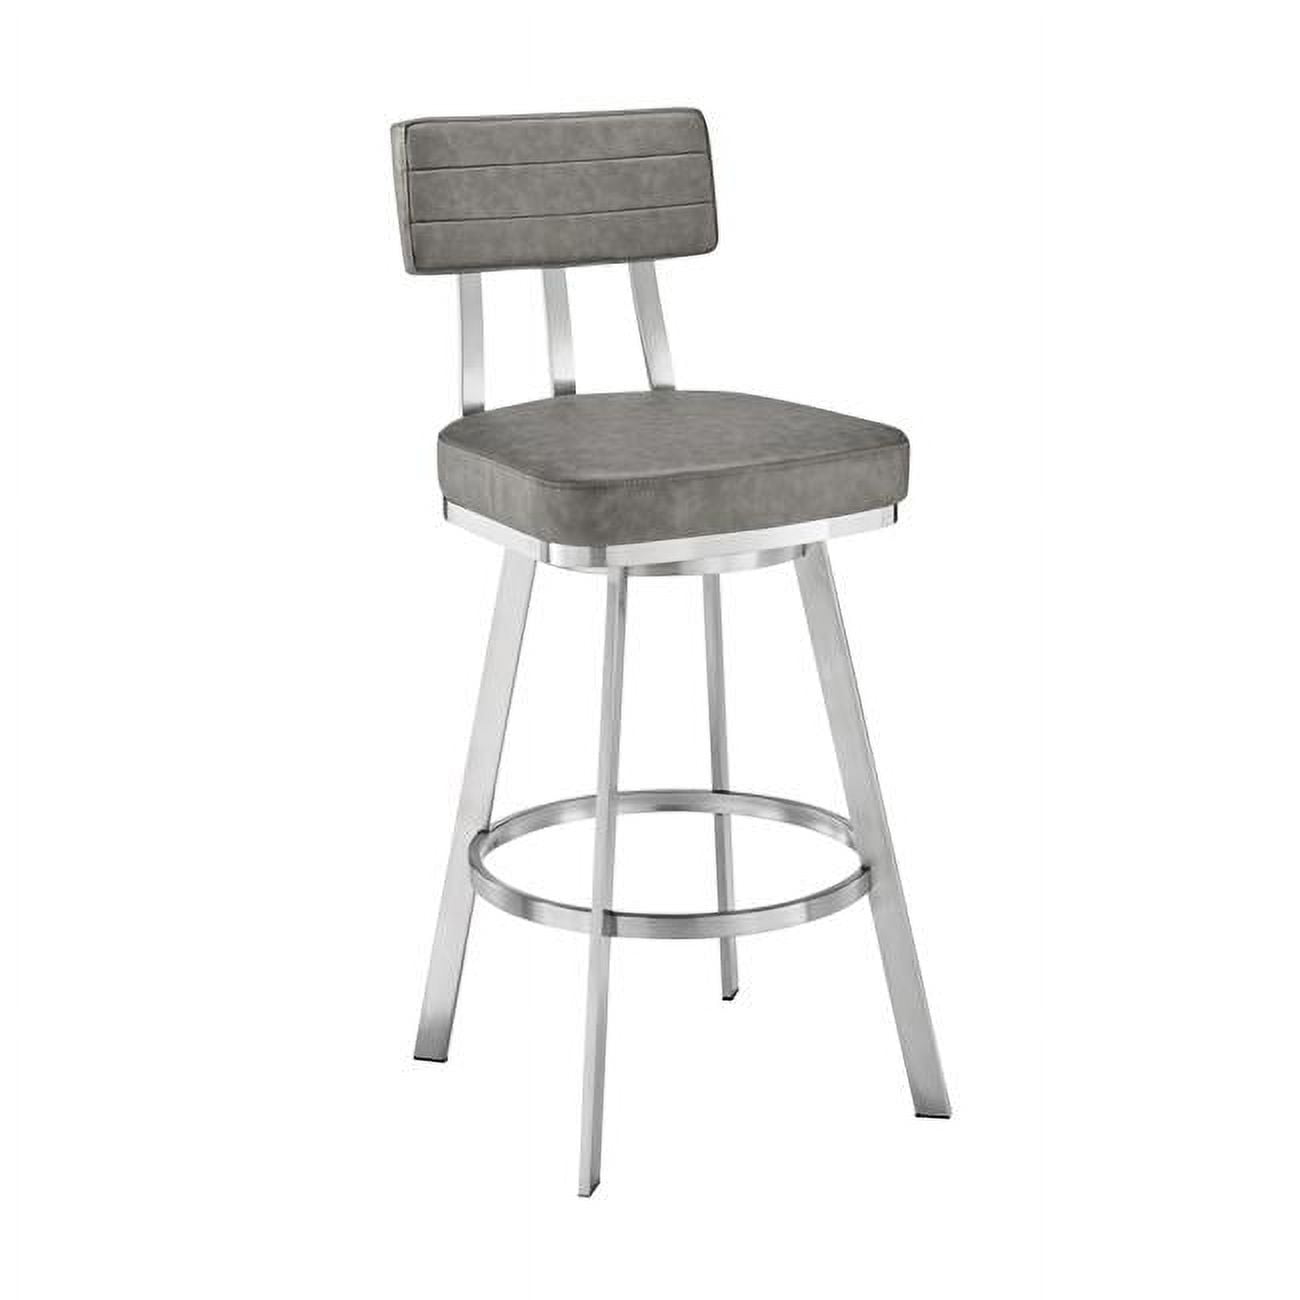 Picture of Armen Living 840254335288 38 x 17.5 x 21 in. Jinab Swivel Counter Stool in Brushed Stainless Steel with Grey Faux Leather